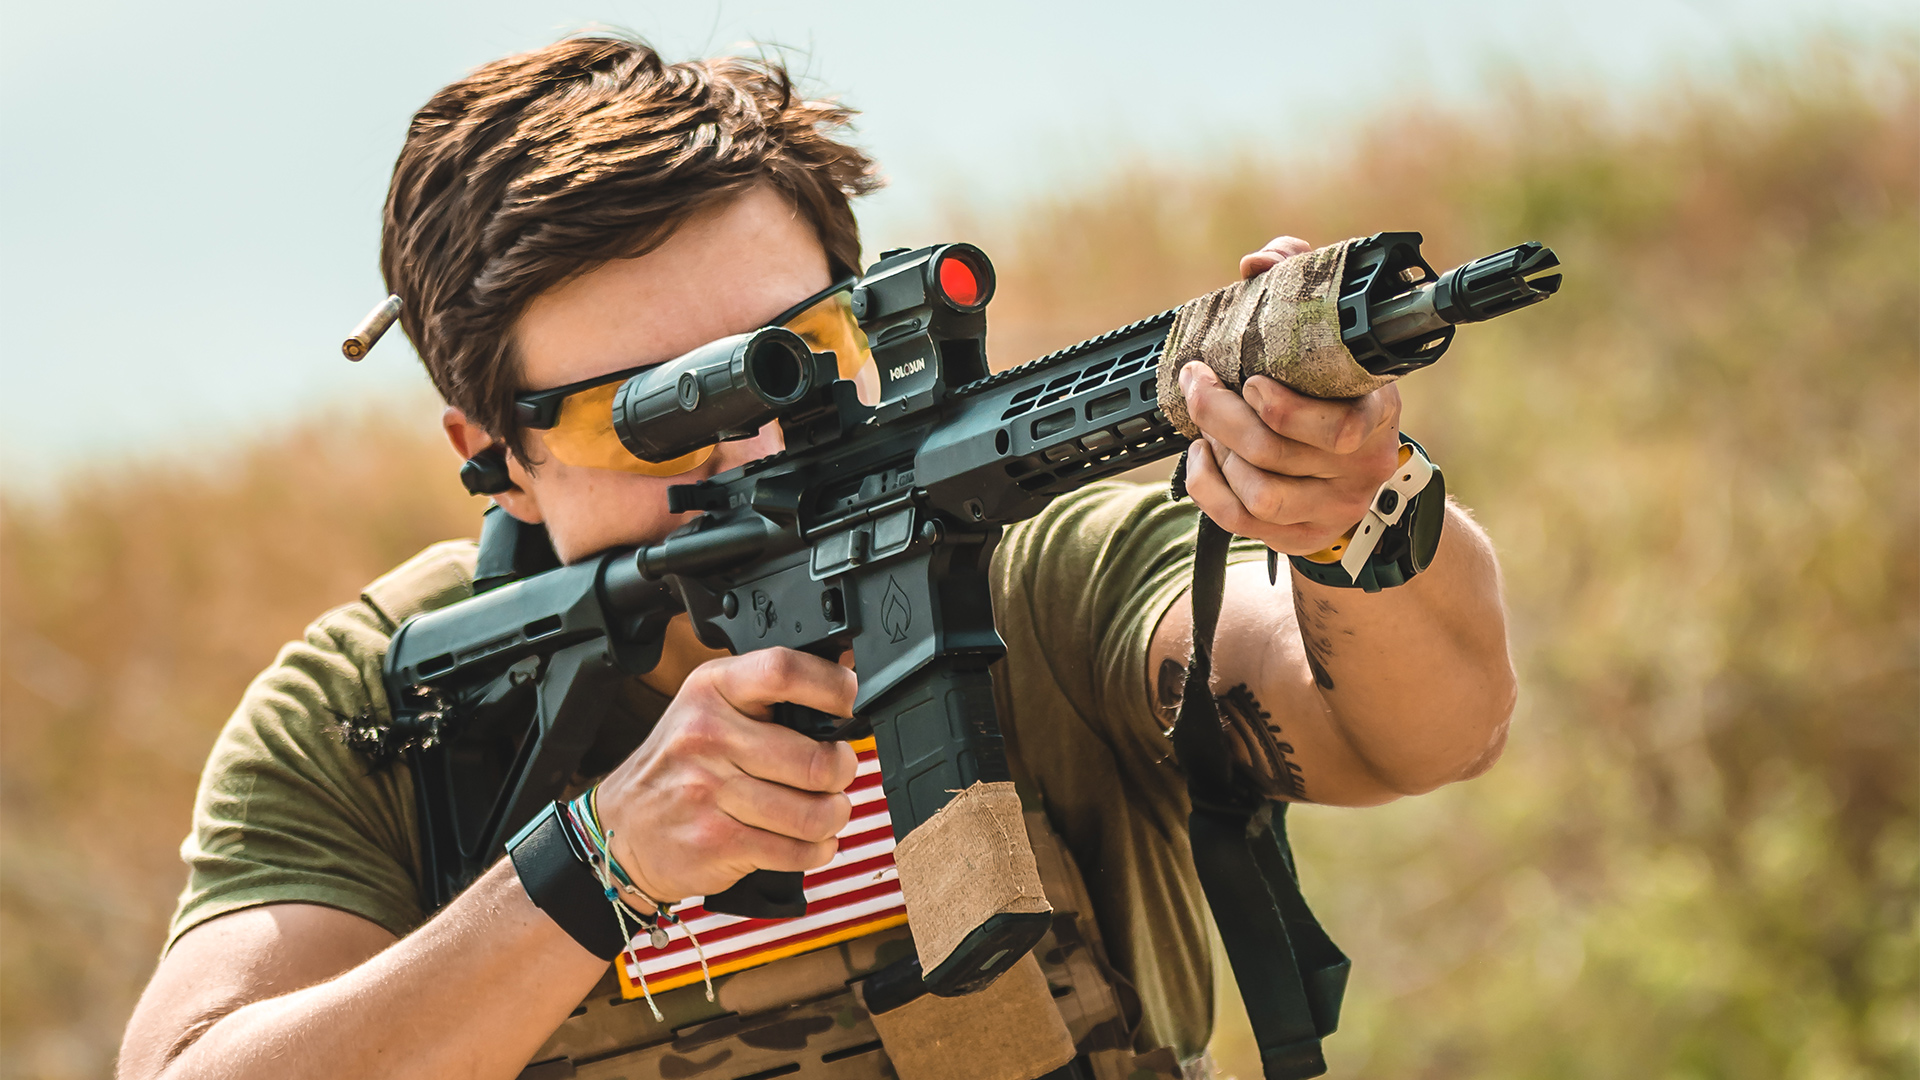 Rifle competitor at tactical games